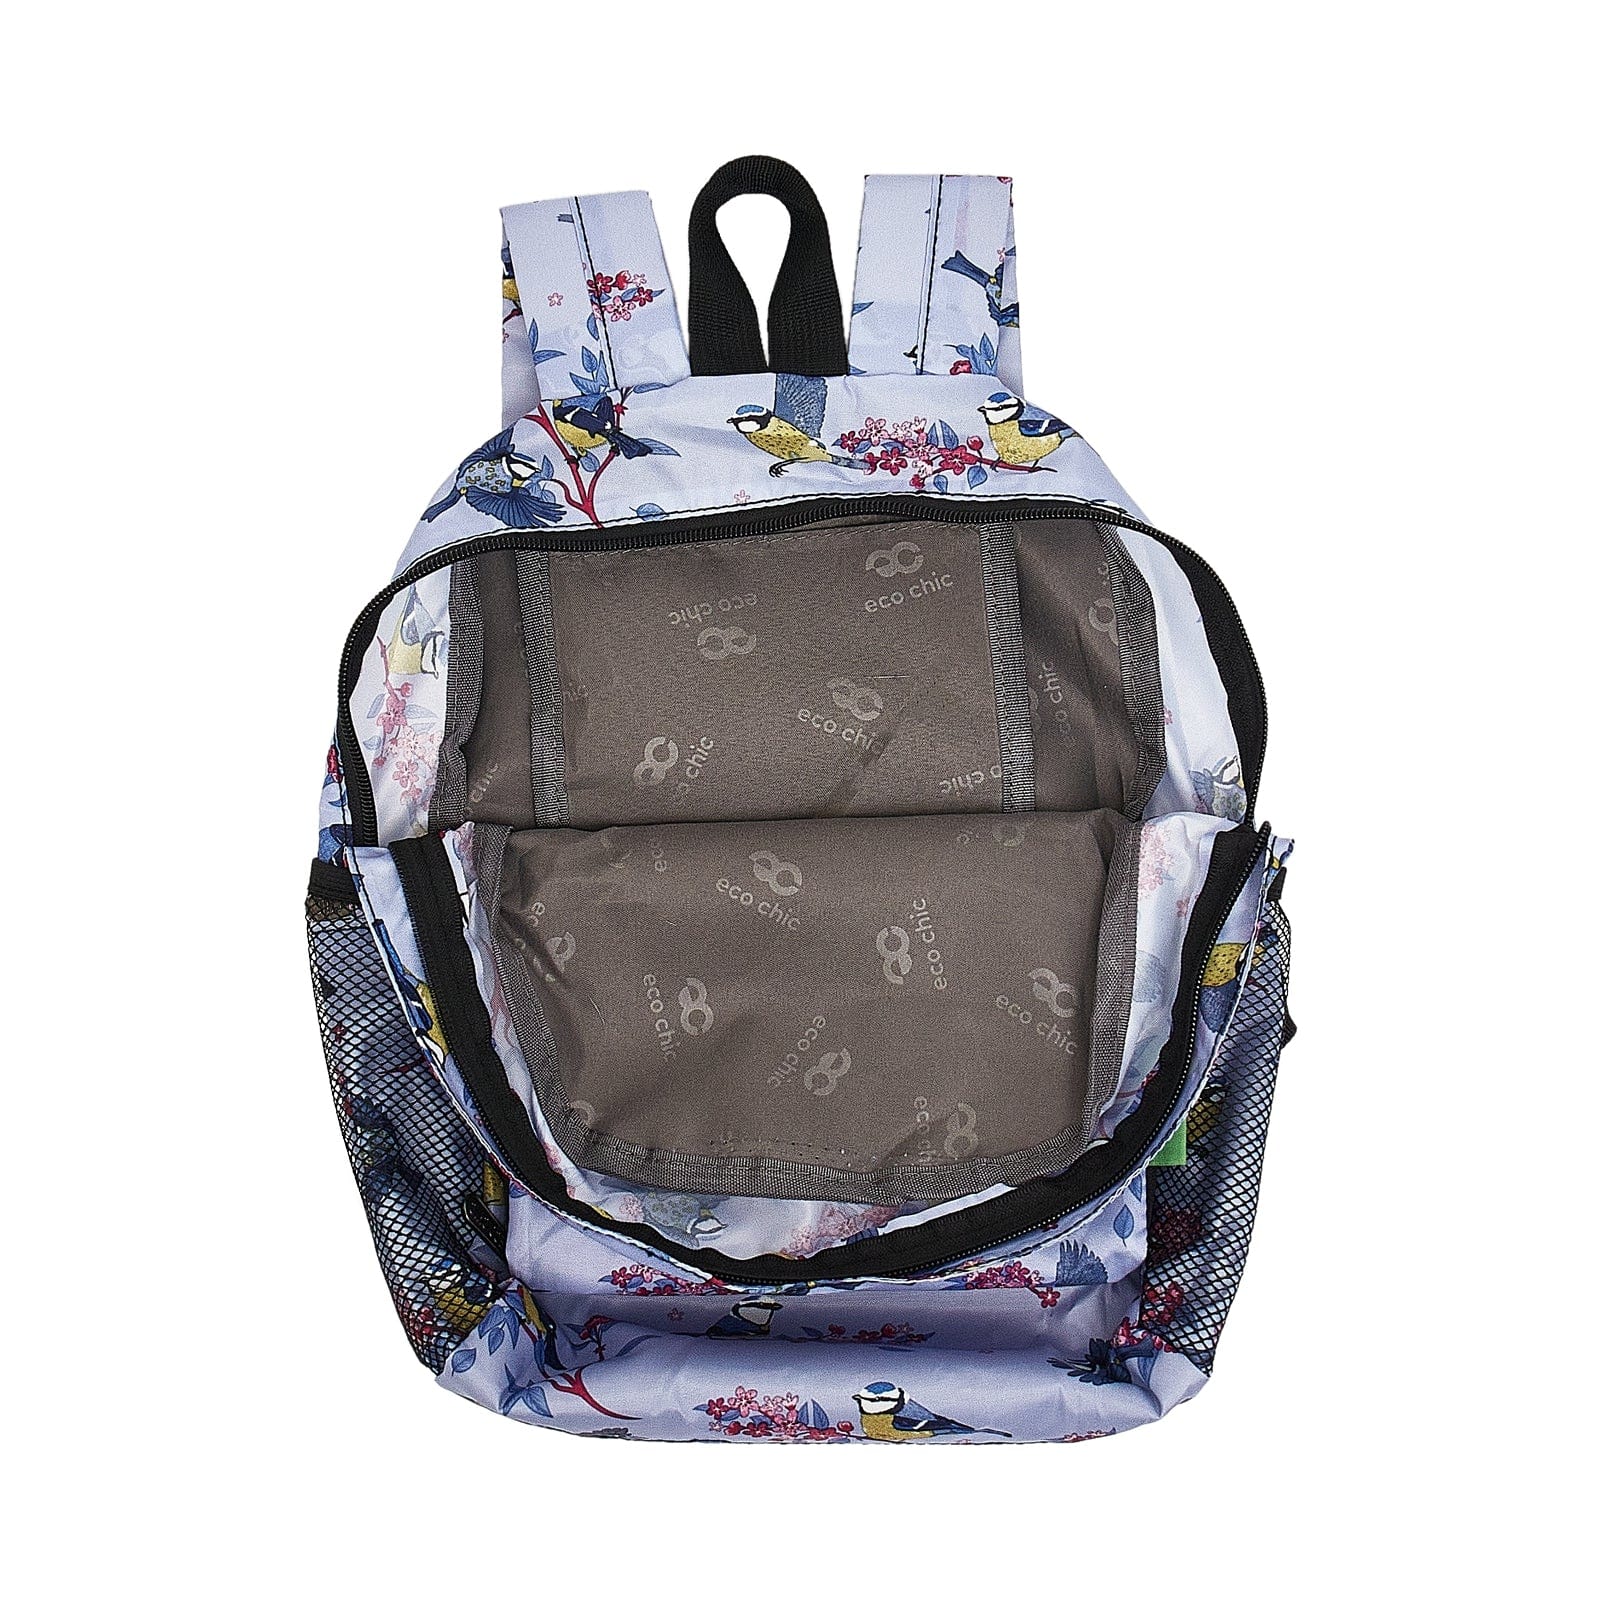 Eco Chic Lilac Eco Chic Lightweight Foldable Mini Backpack Blue Tits